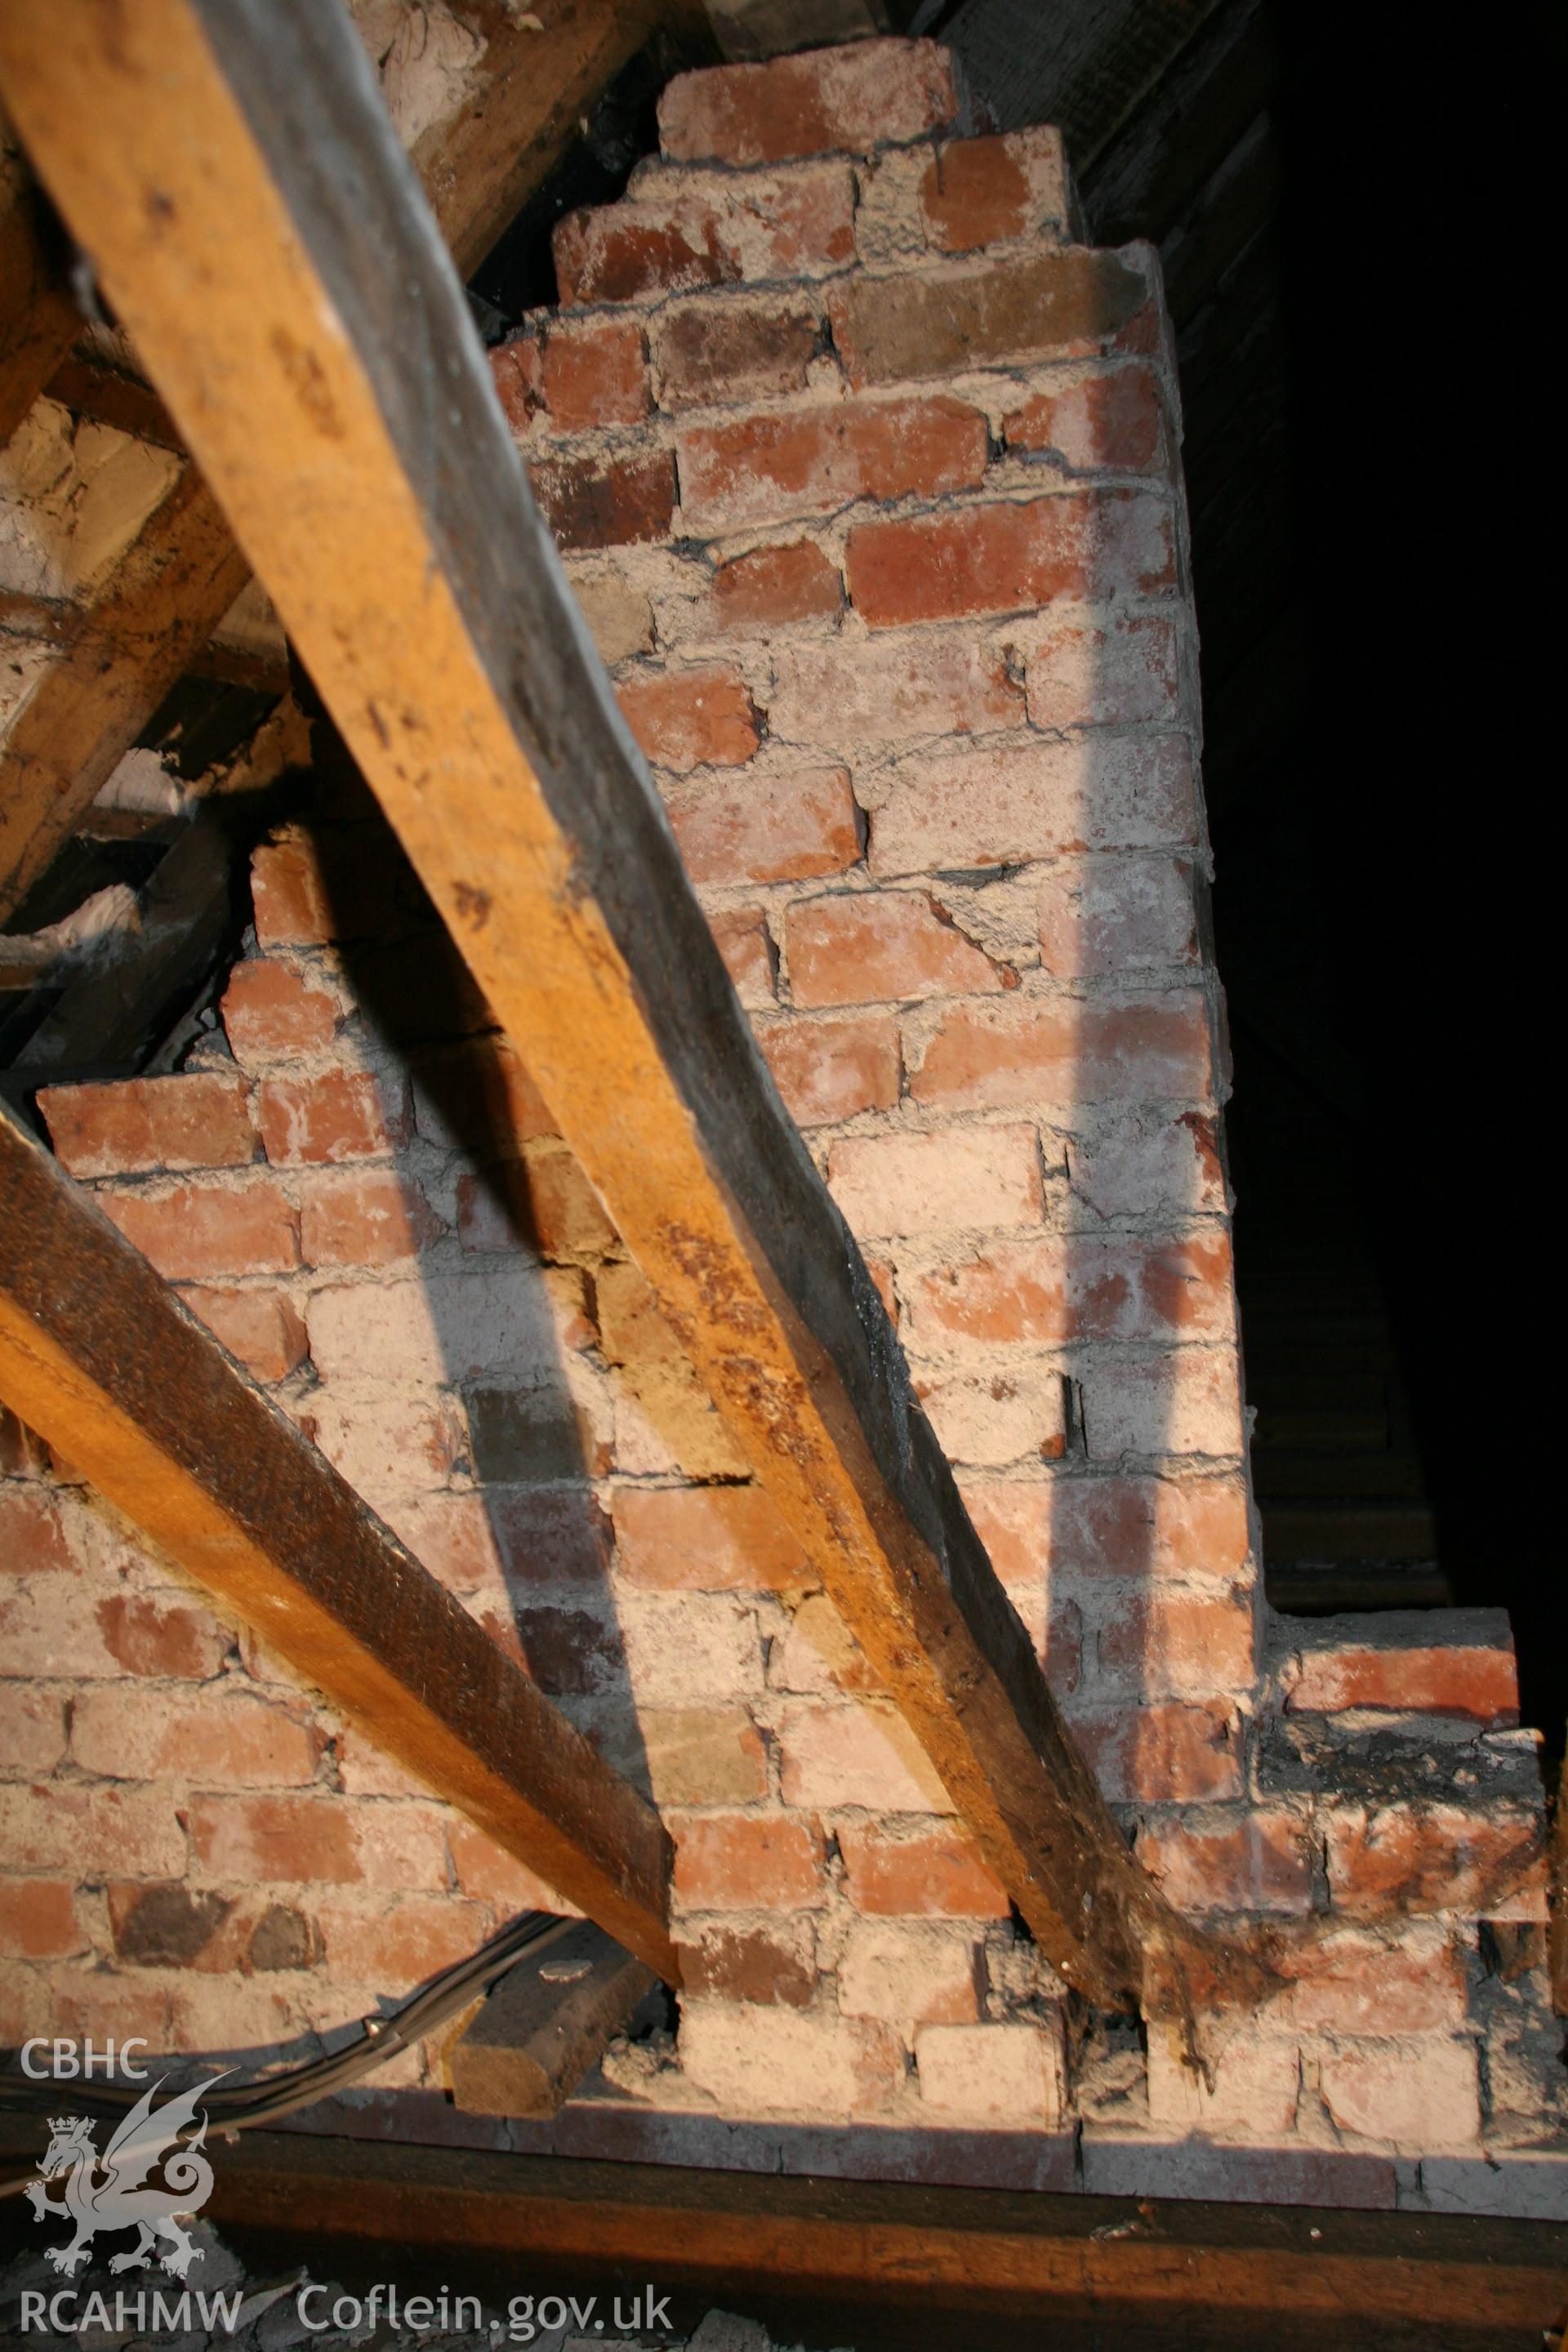 Photograph showing detailed interior view of brick wall & wooden beams in loft of former Llawrybettws Welsh Calvinistic Methodist chapel, Glanyrafon, Corwen. Taken by Tim Allen on 27th February 2019 to meet a condition attached to planning application.